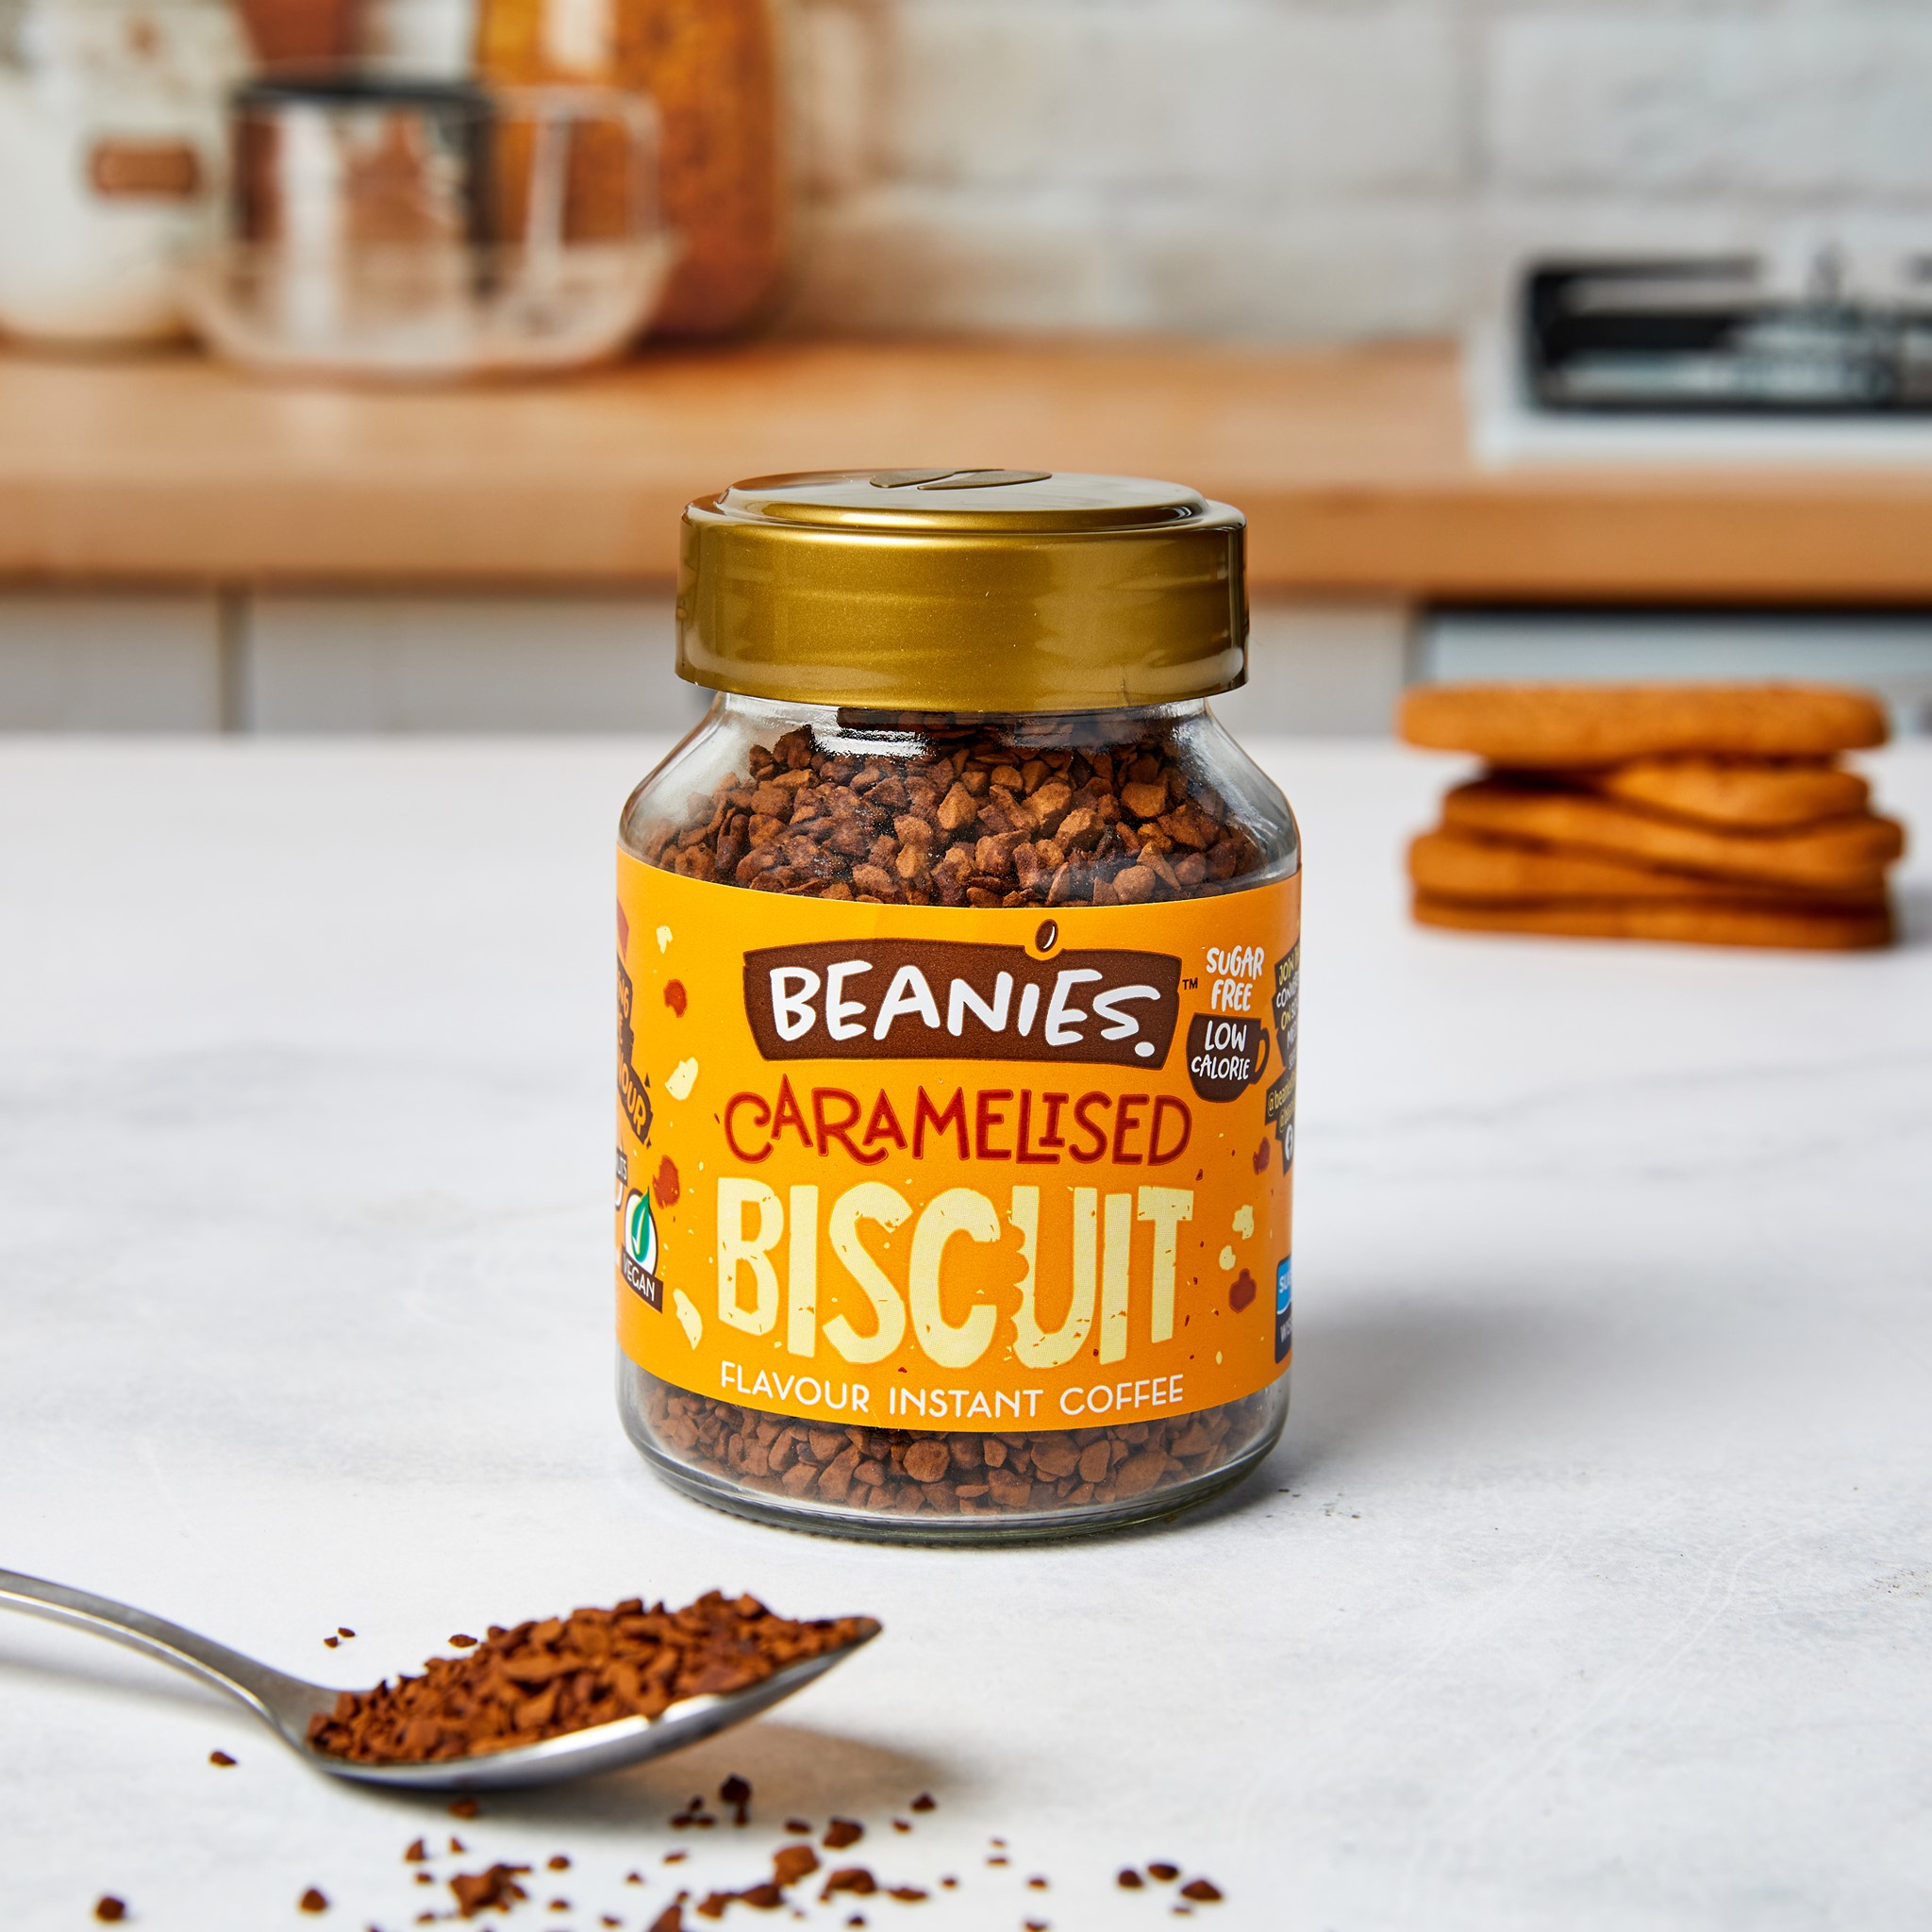 beanies caramelised biscuit flavour